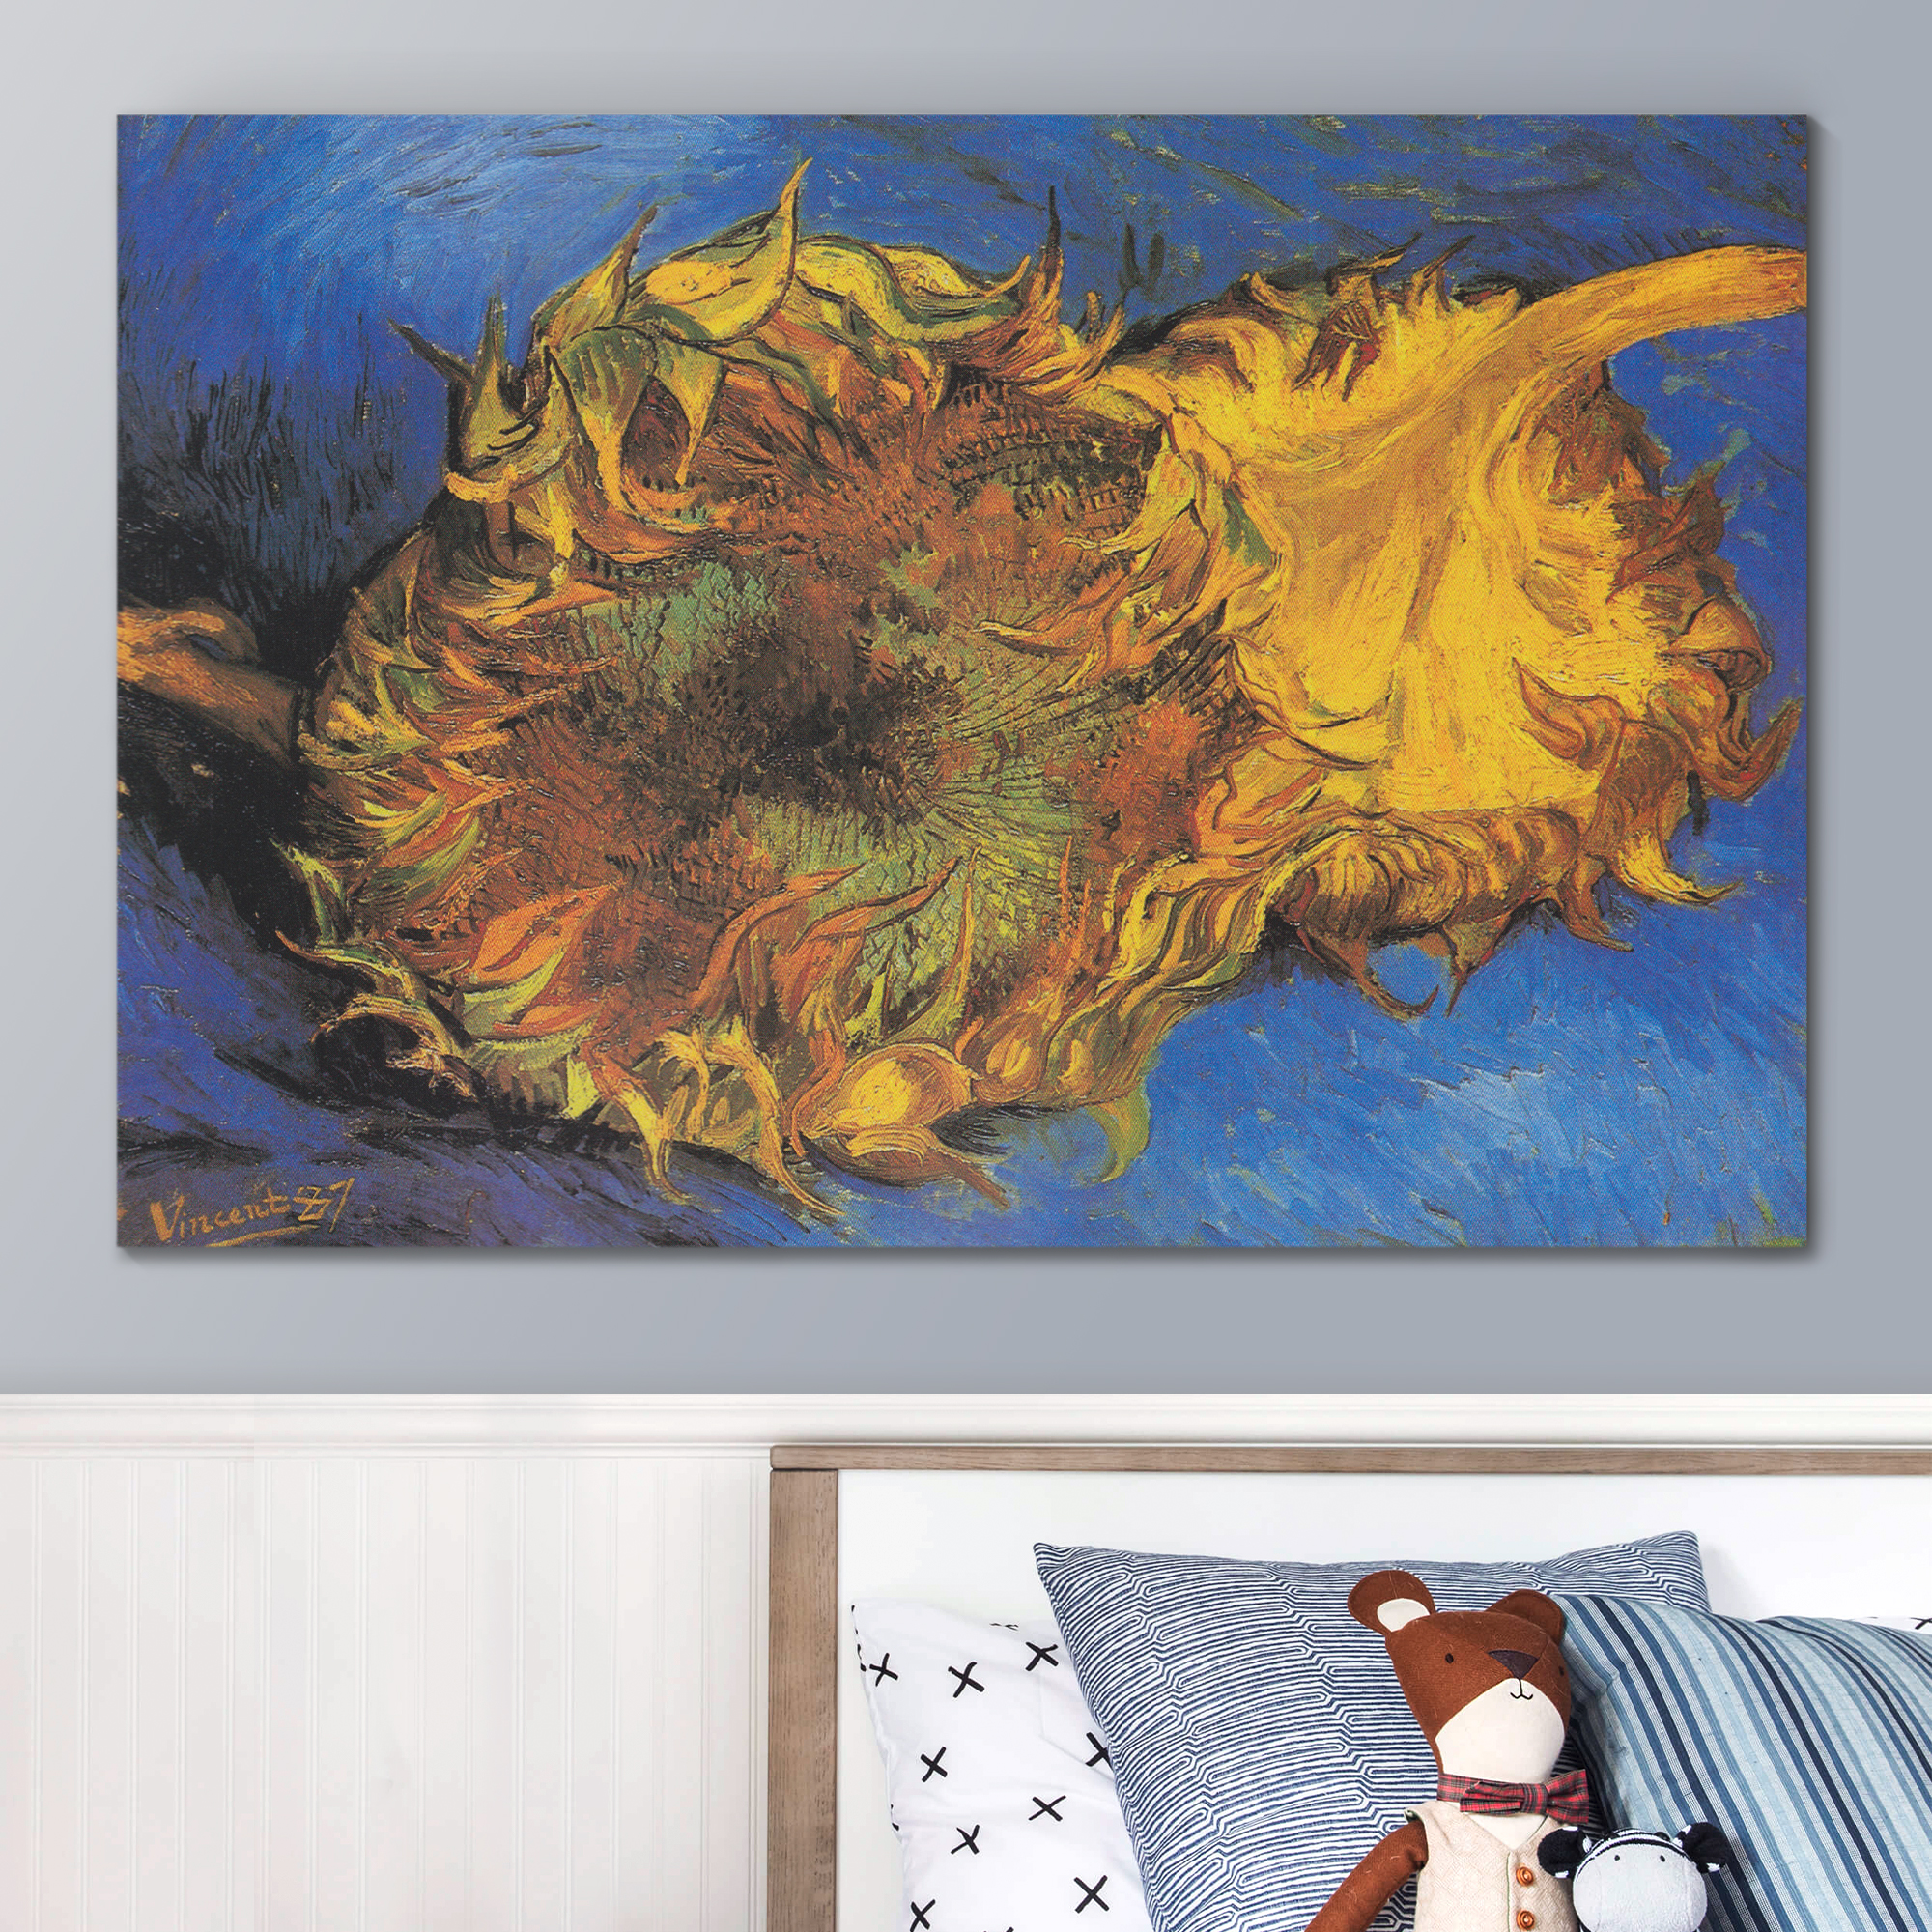 Two Cut Sunflowers, 1887 by Vincent Van Gogh - Canvas Print Wall Art Famous Painting Reproduction - 12